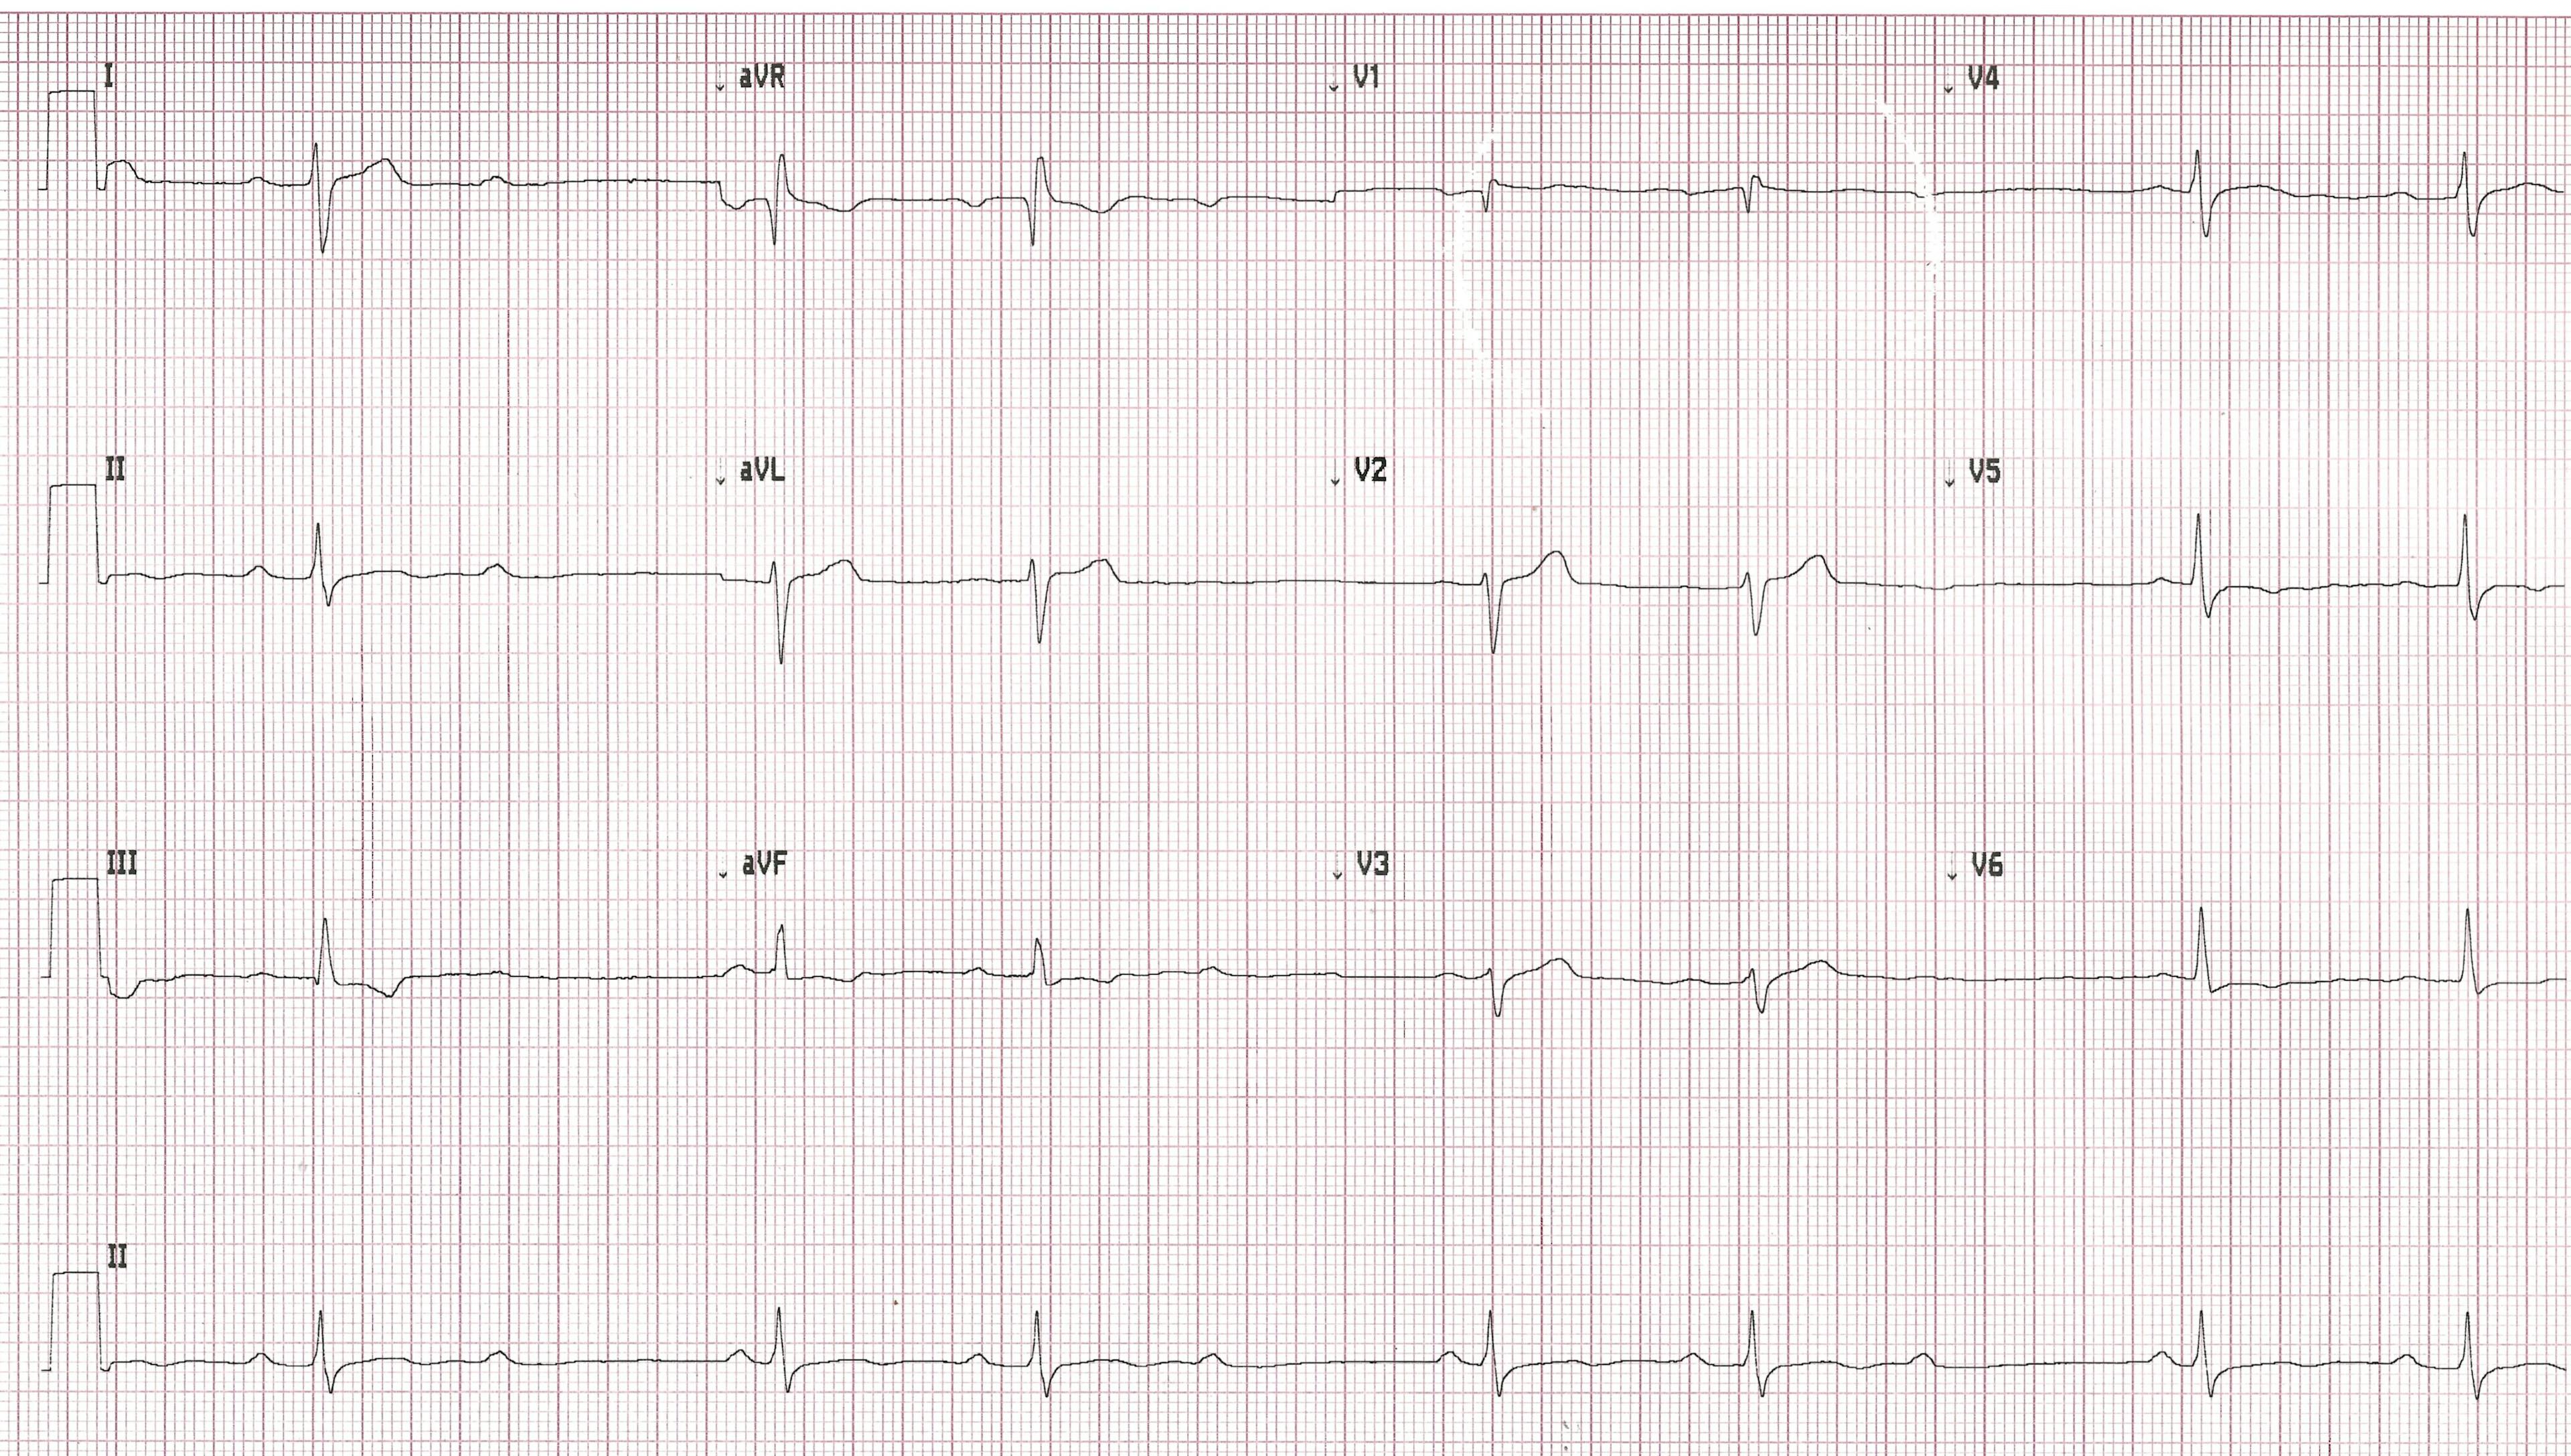 Printout of an ECG from a patient presenting to the emergency department. | Credit: Brady Pregerson, MD